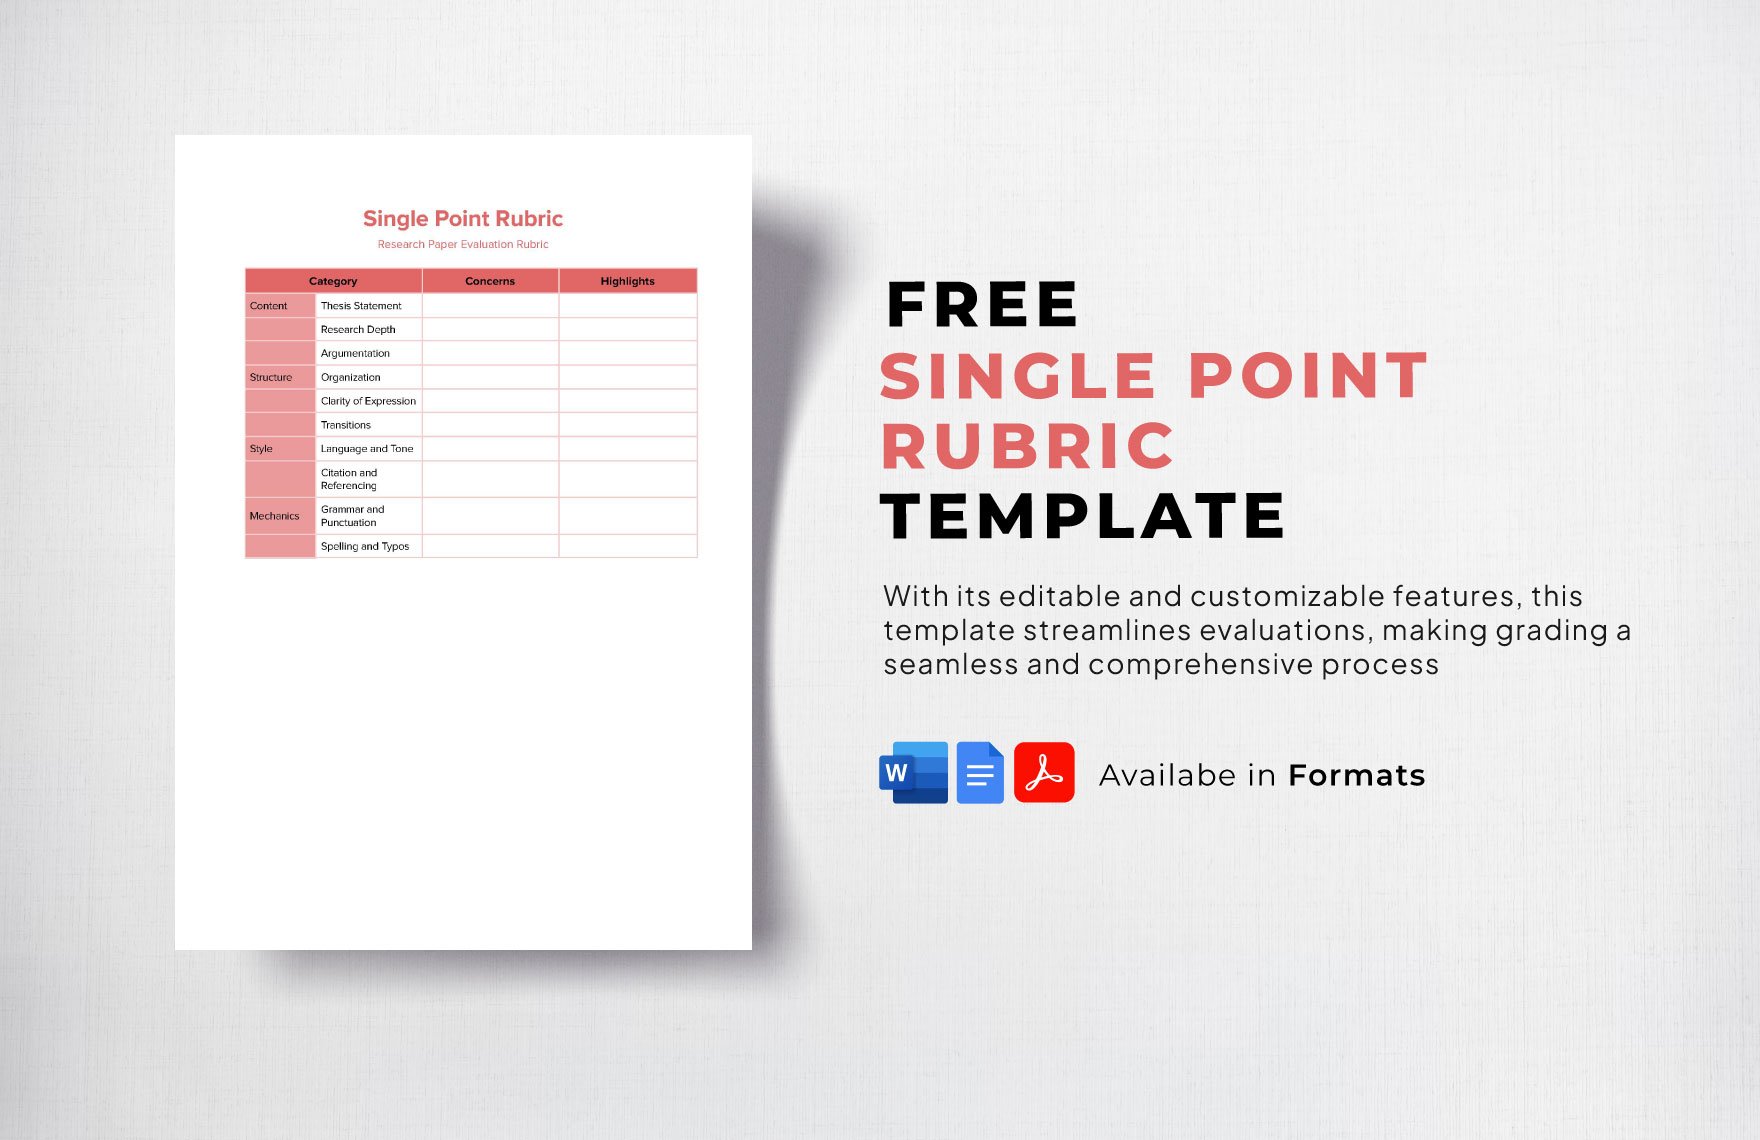 Free Single Point Rubric Template